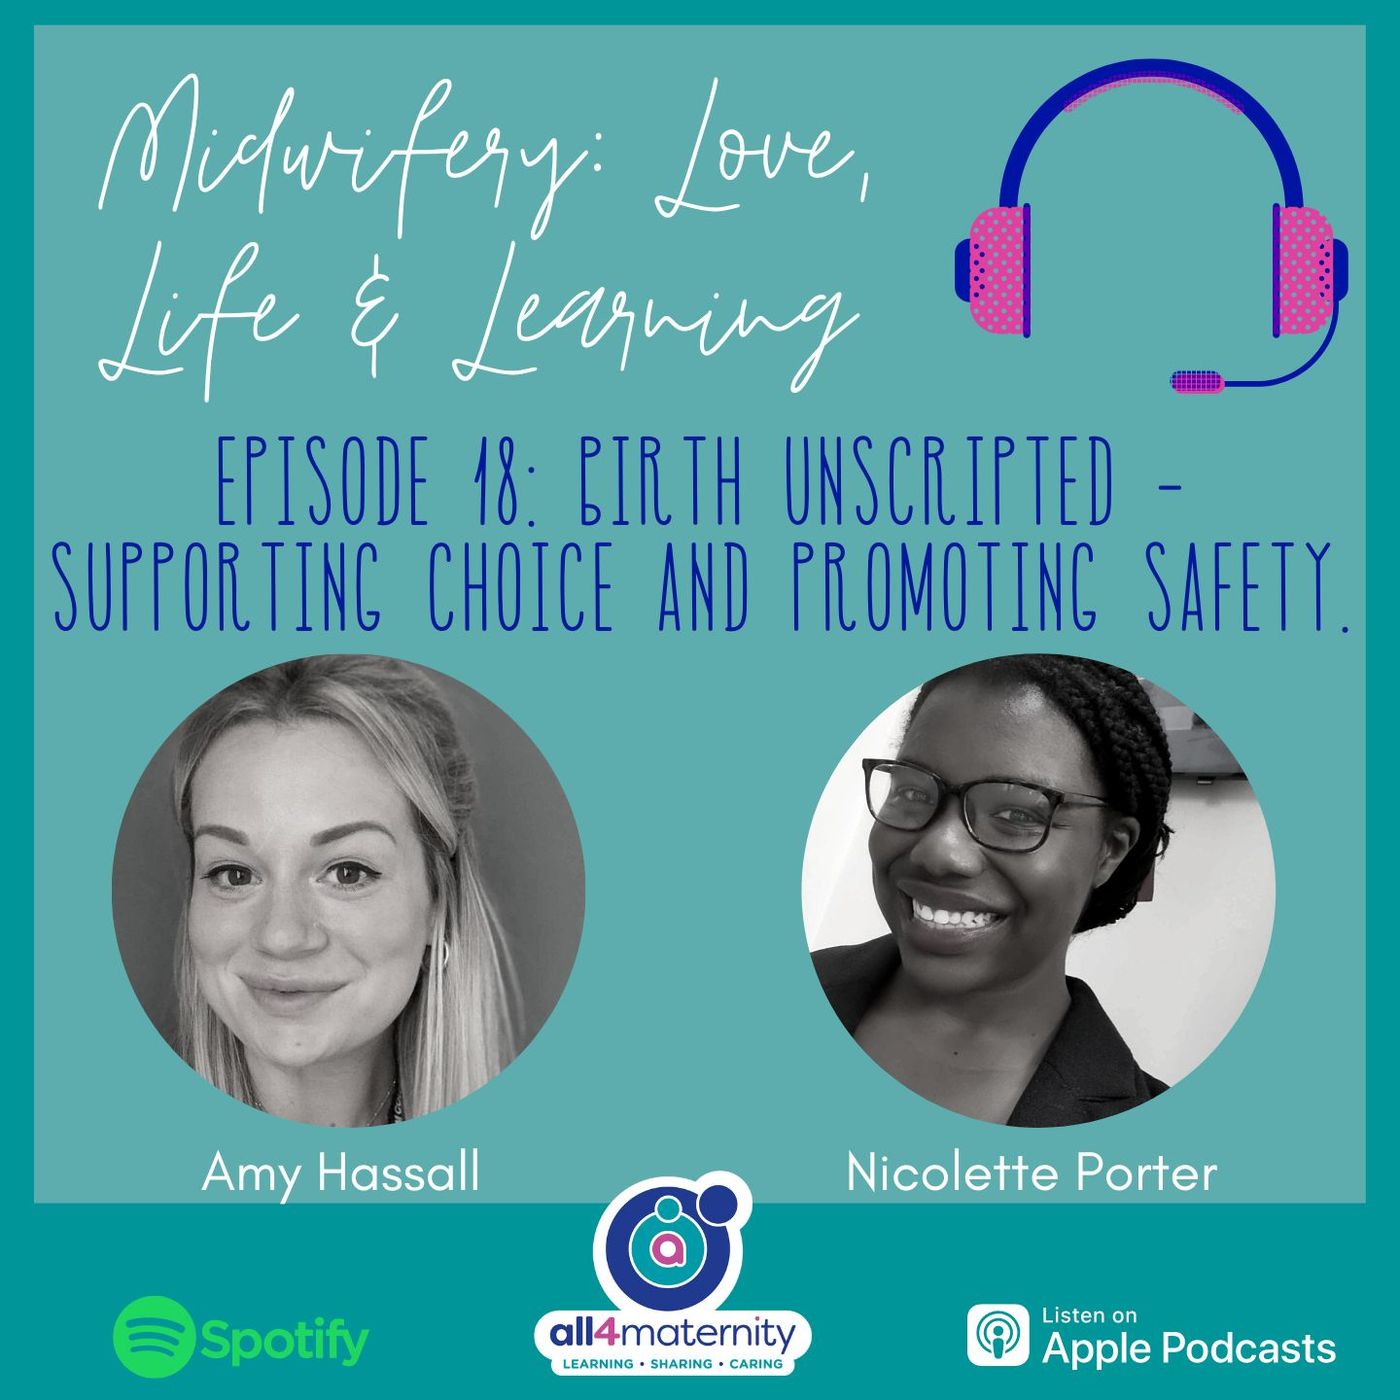 18: Birth Unscripted - Supporting Choice and Promoting Safety